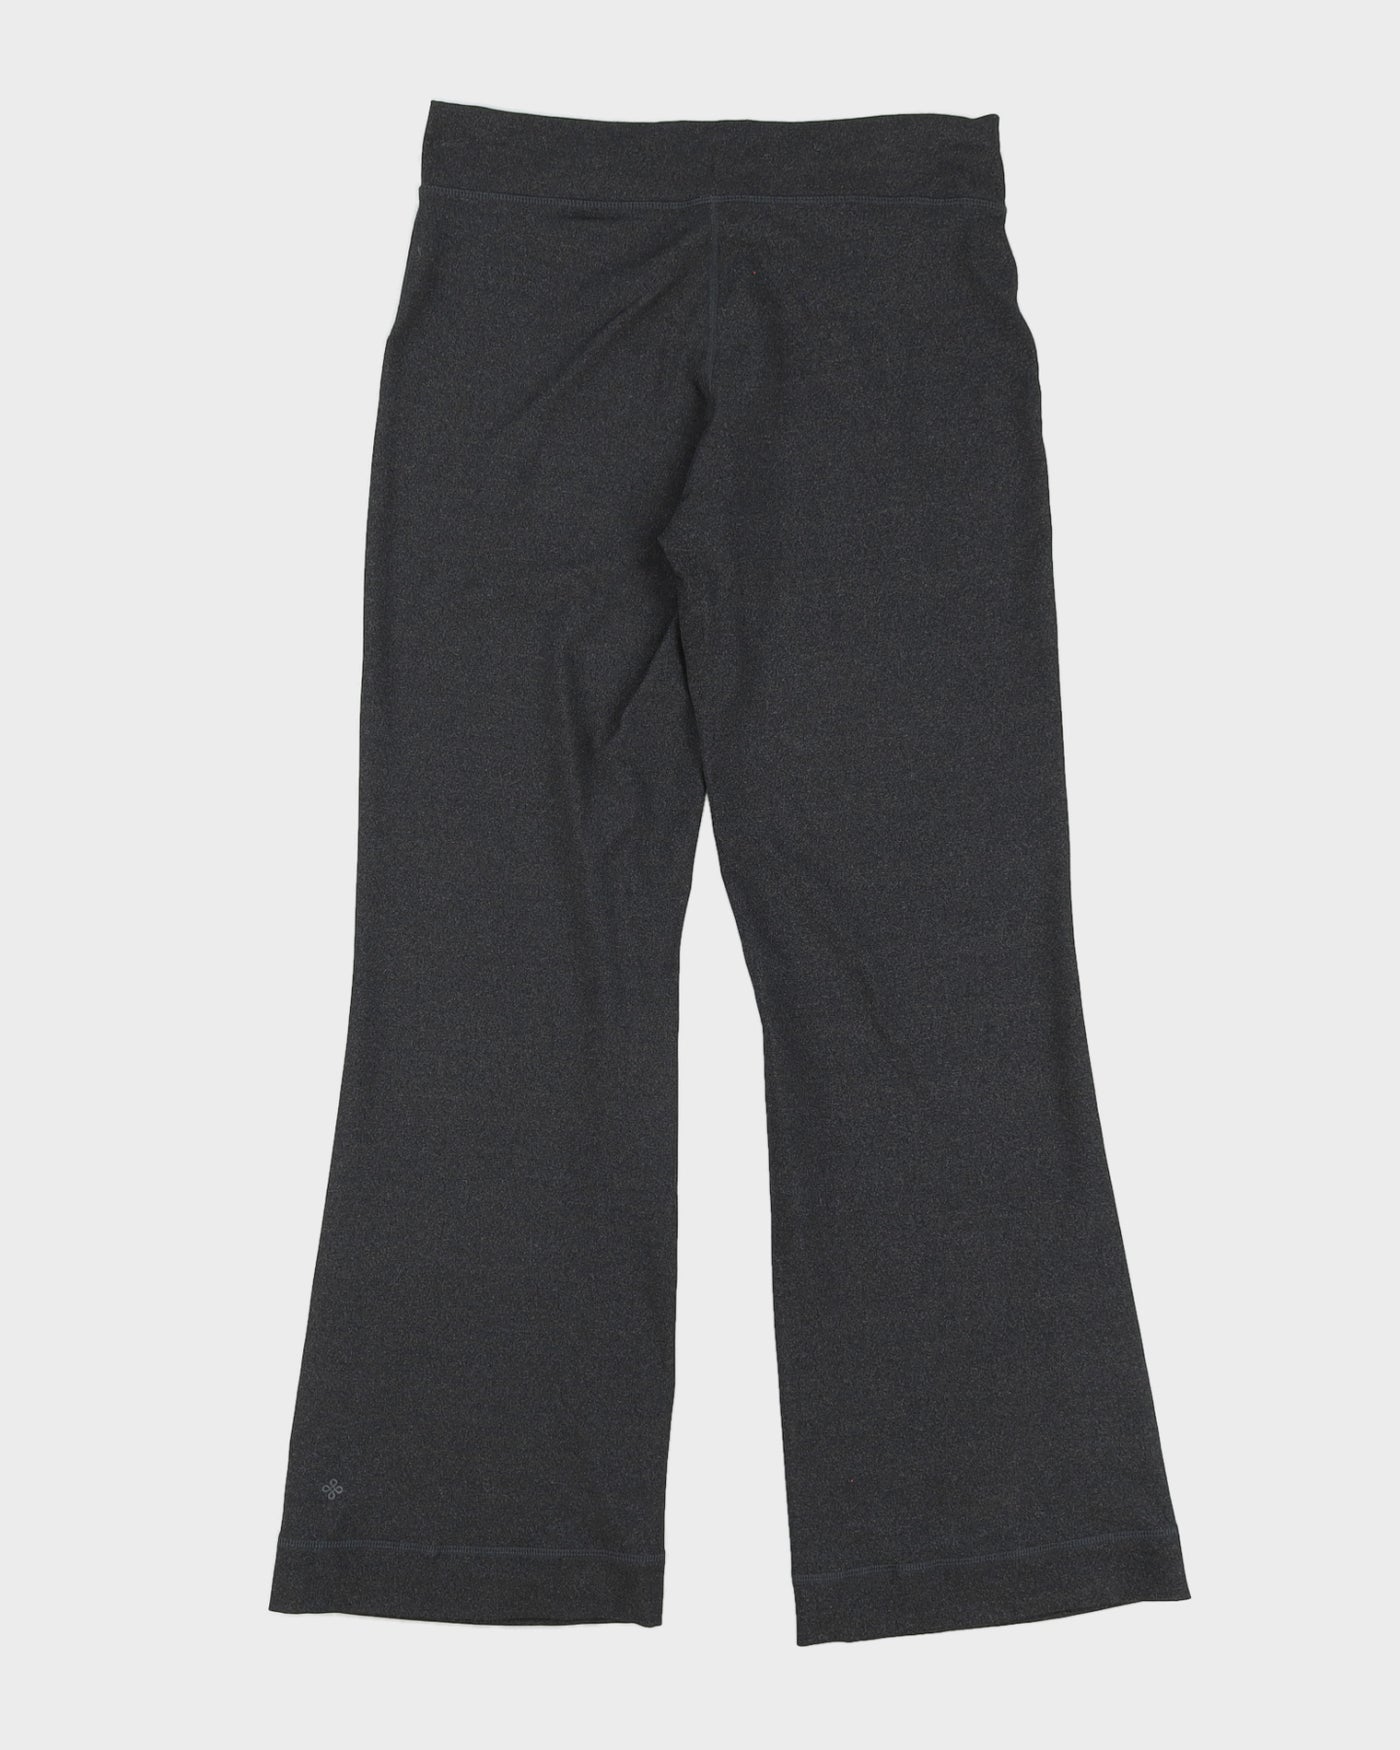 Grey Flared Sports Trousers - M